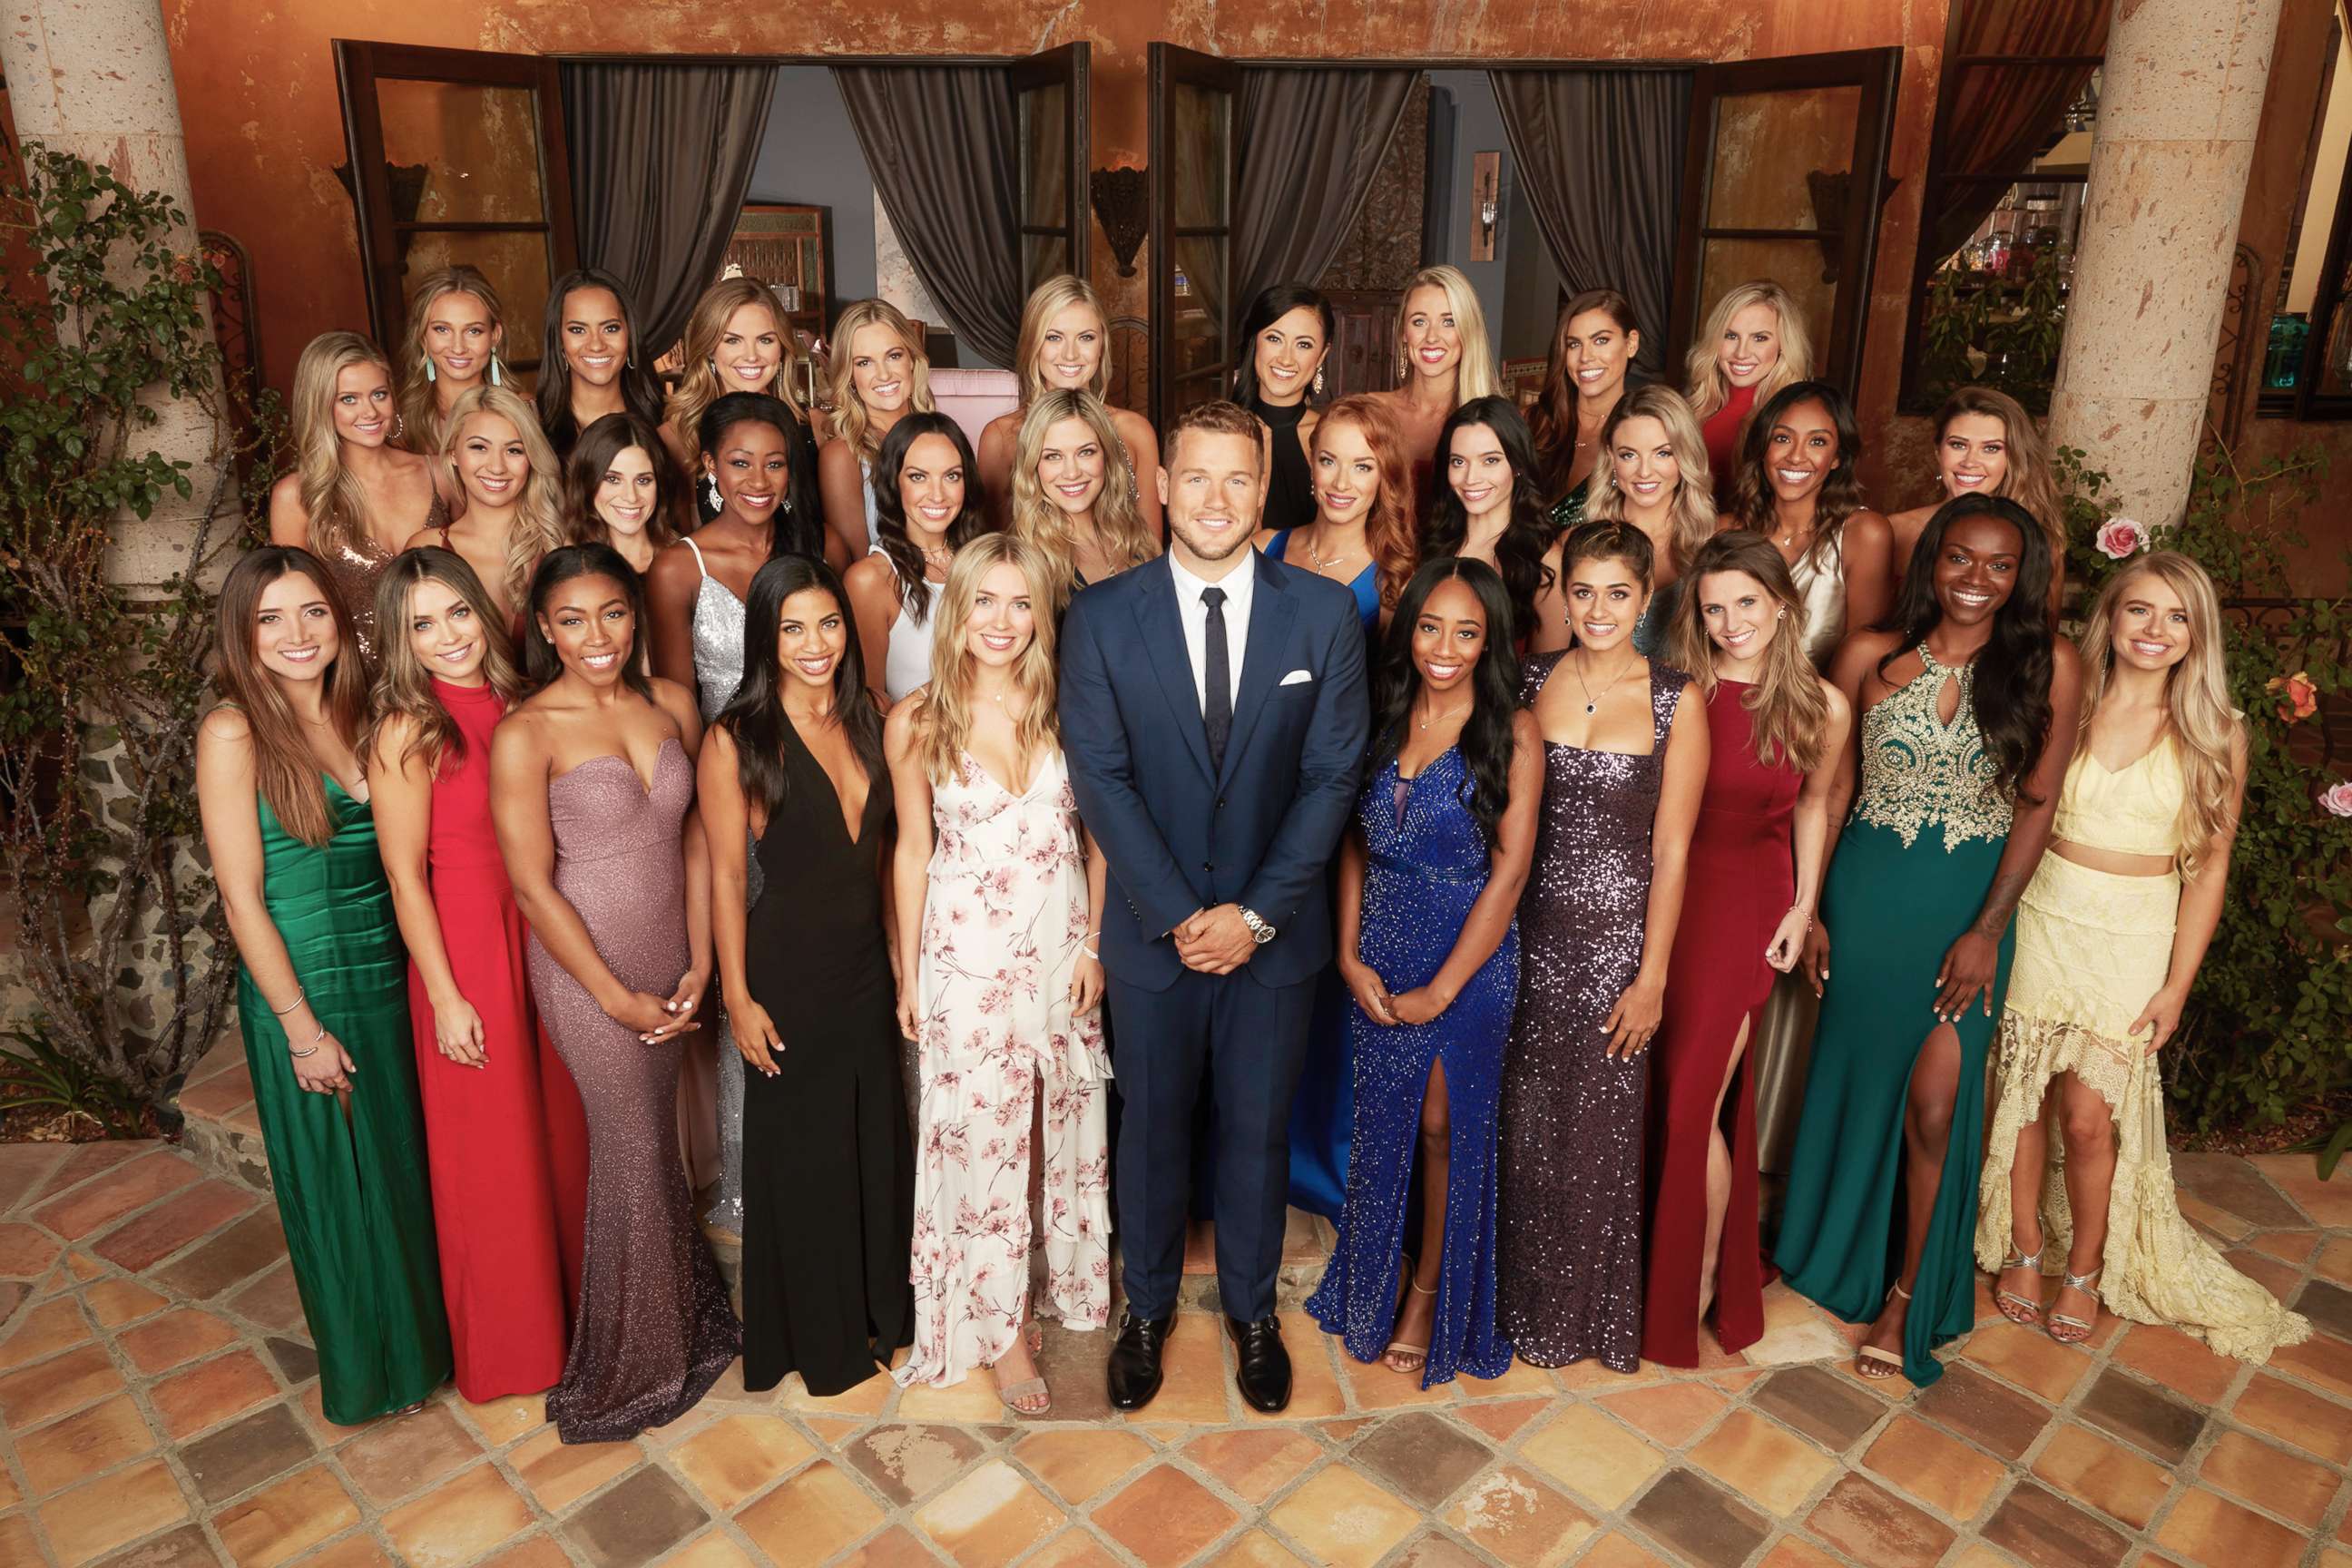 PHOTO: Colton Underwood is pictured with the cast of the new season of "The Bachelor."